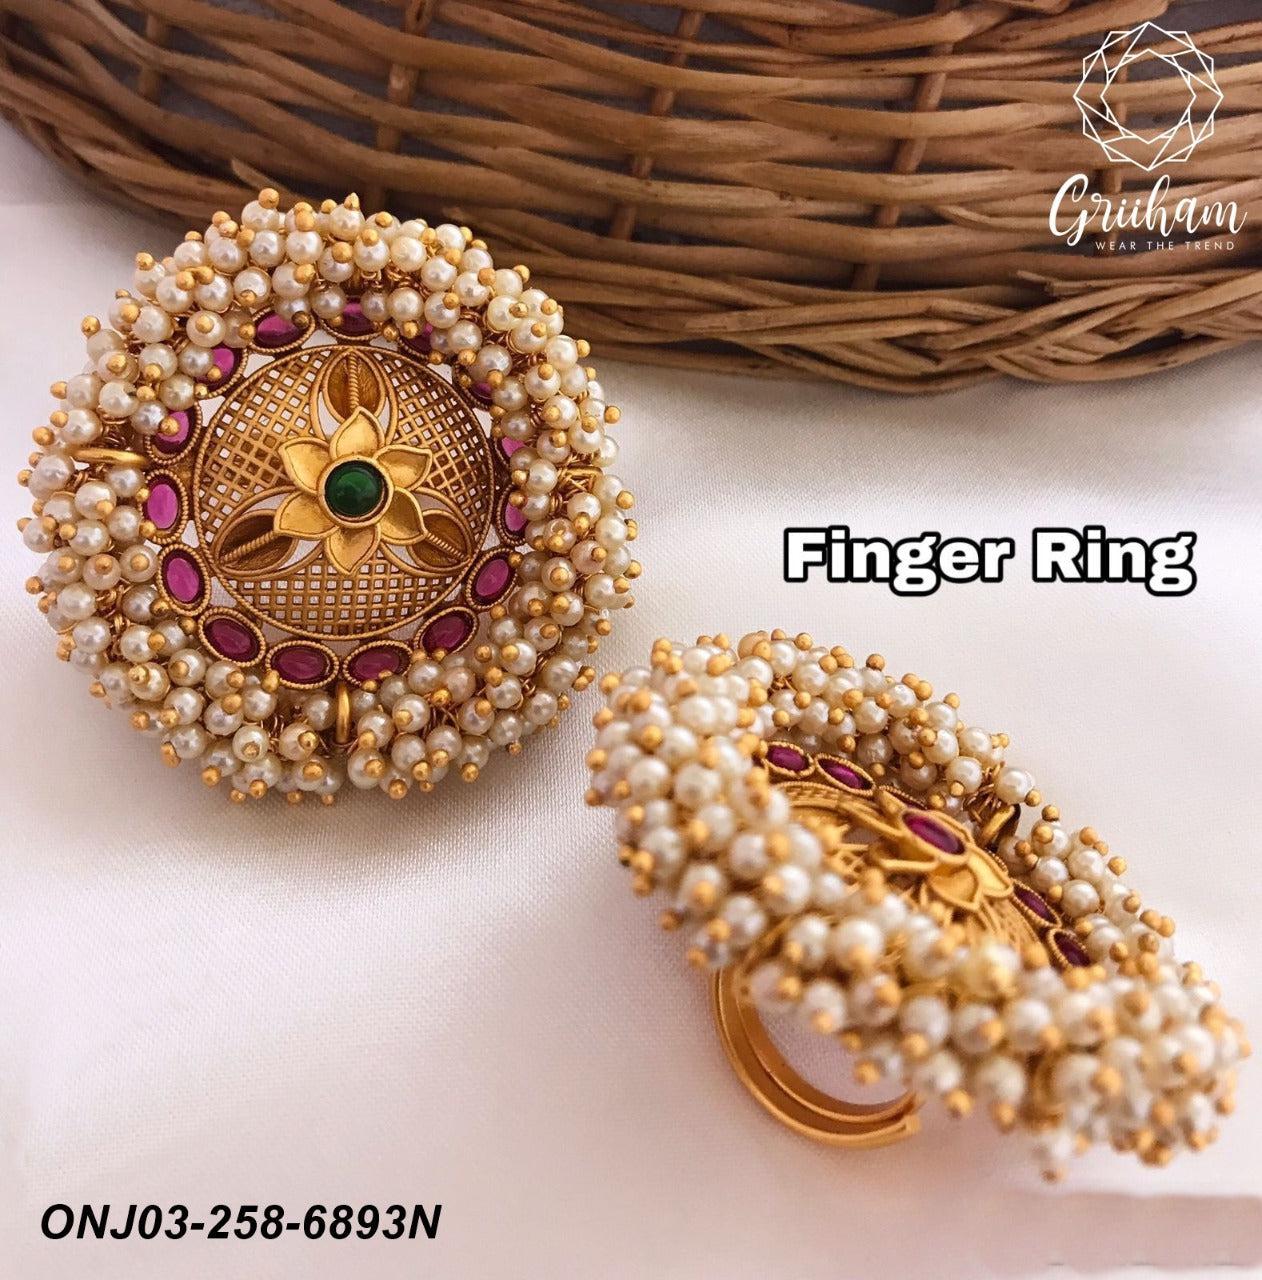 Gold Plated Adjustable Size Finger ring with Stones and Pearls 6893N